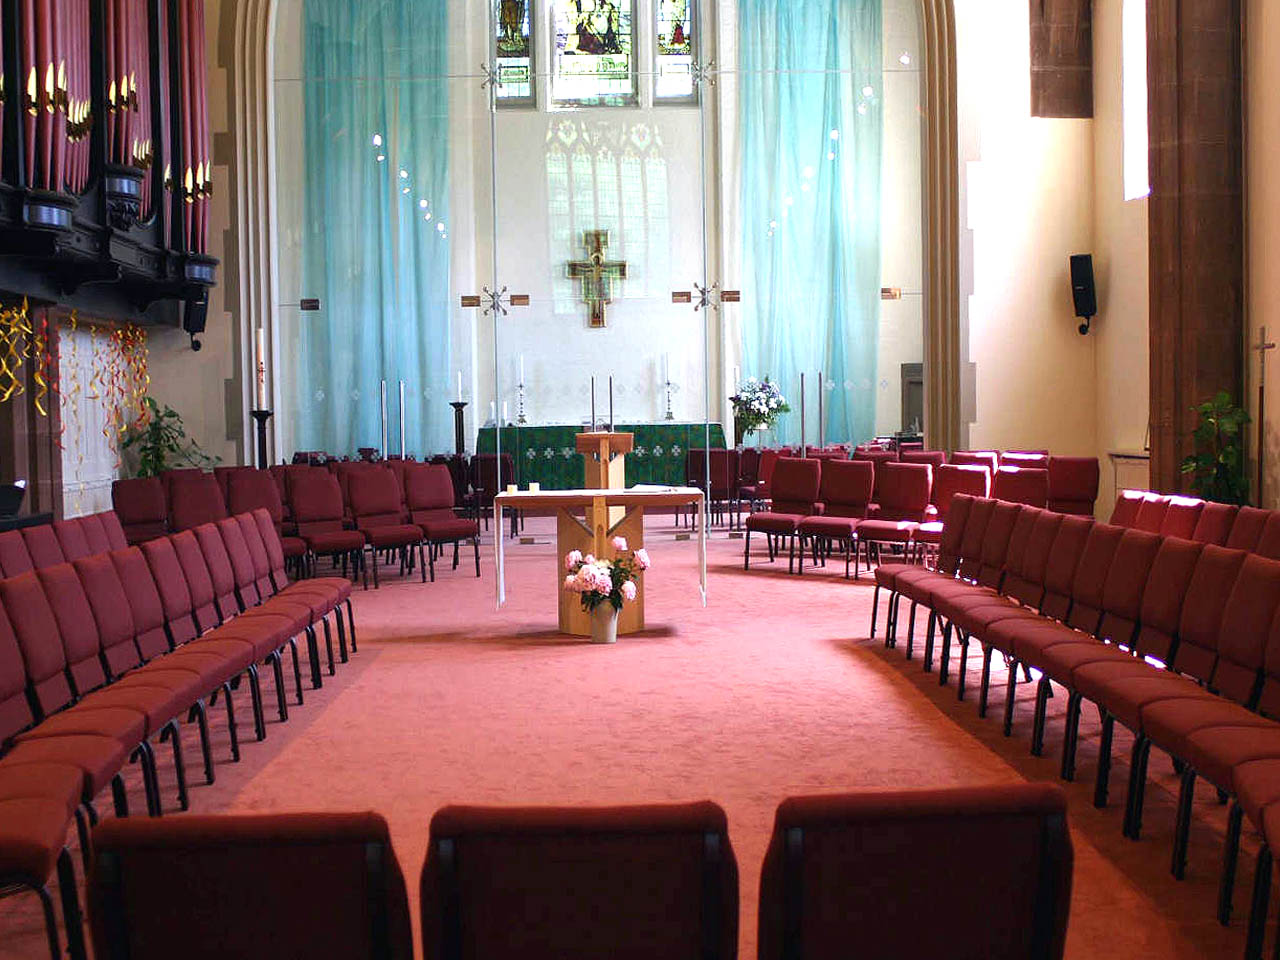 St Paul, view of the interior